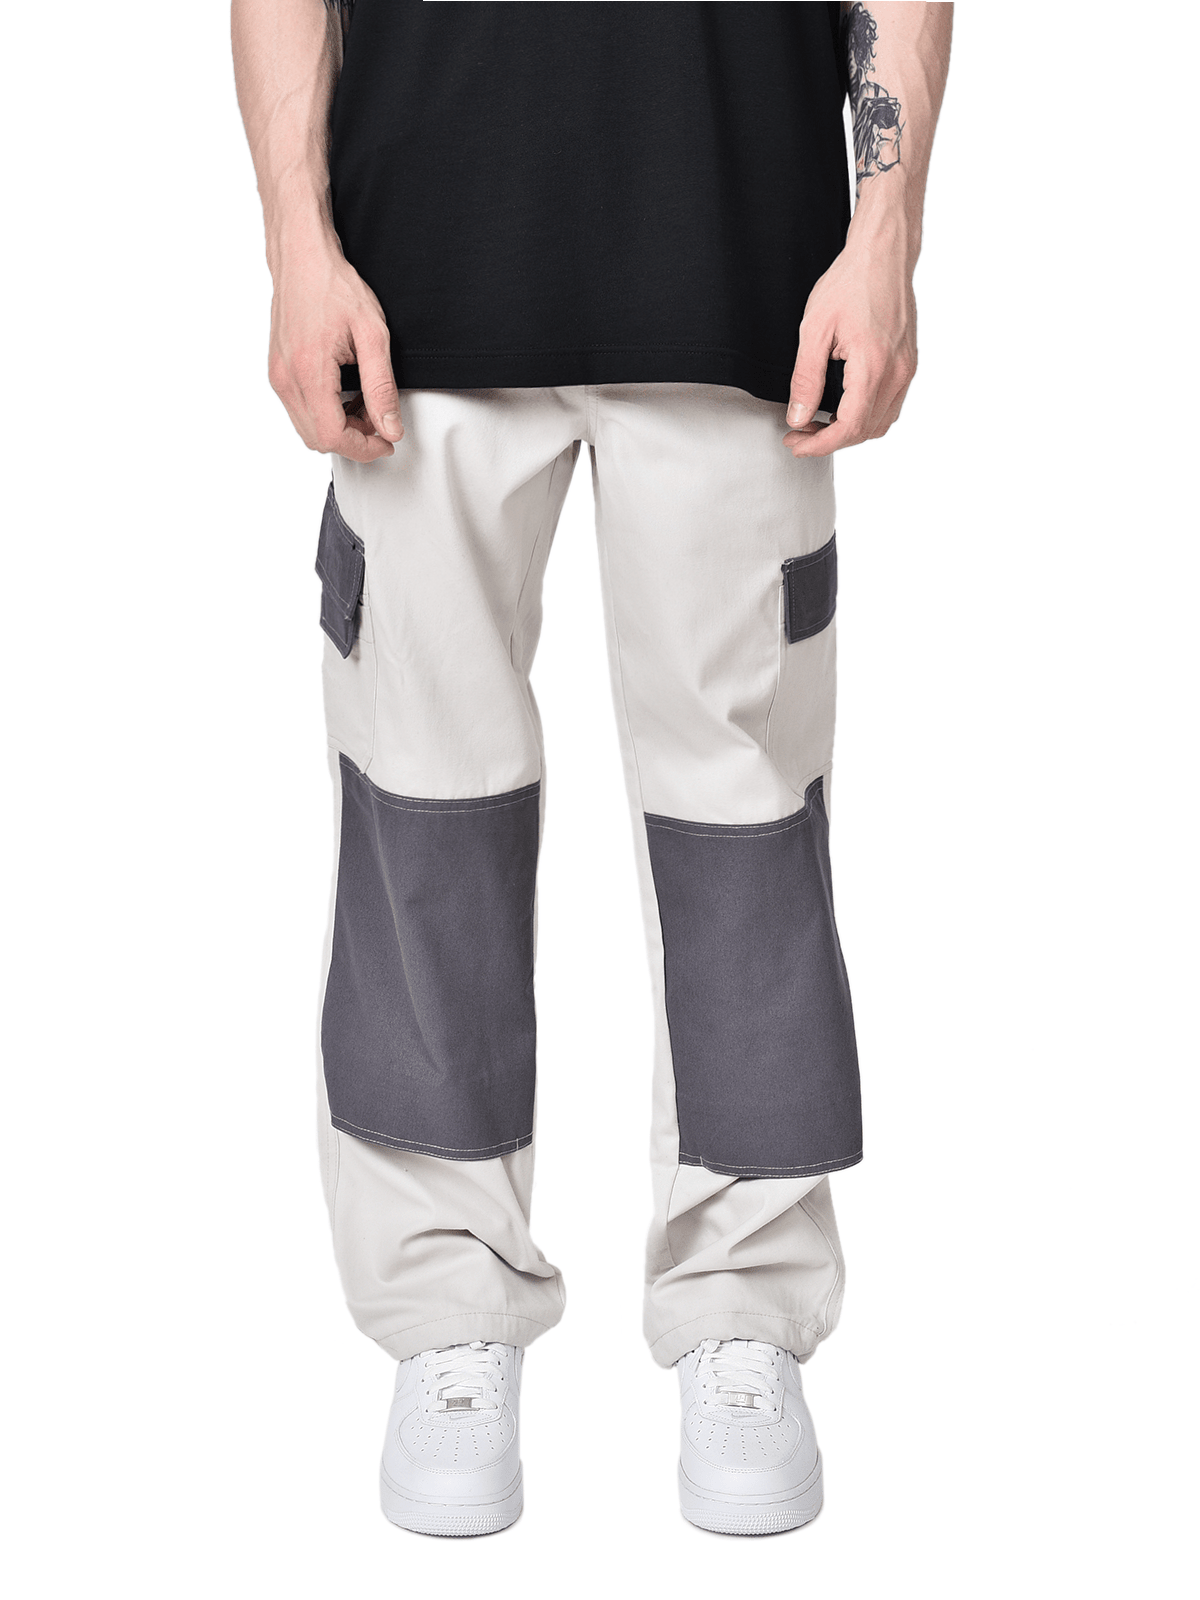 Industrial Pants - Off White